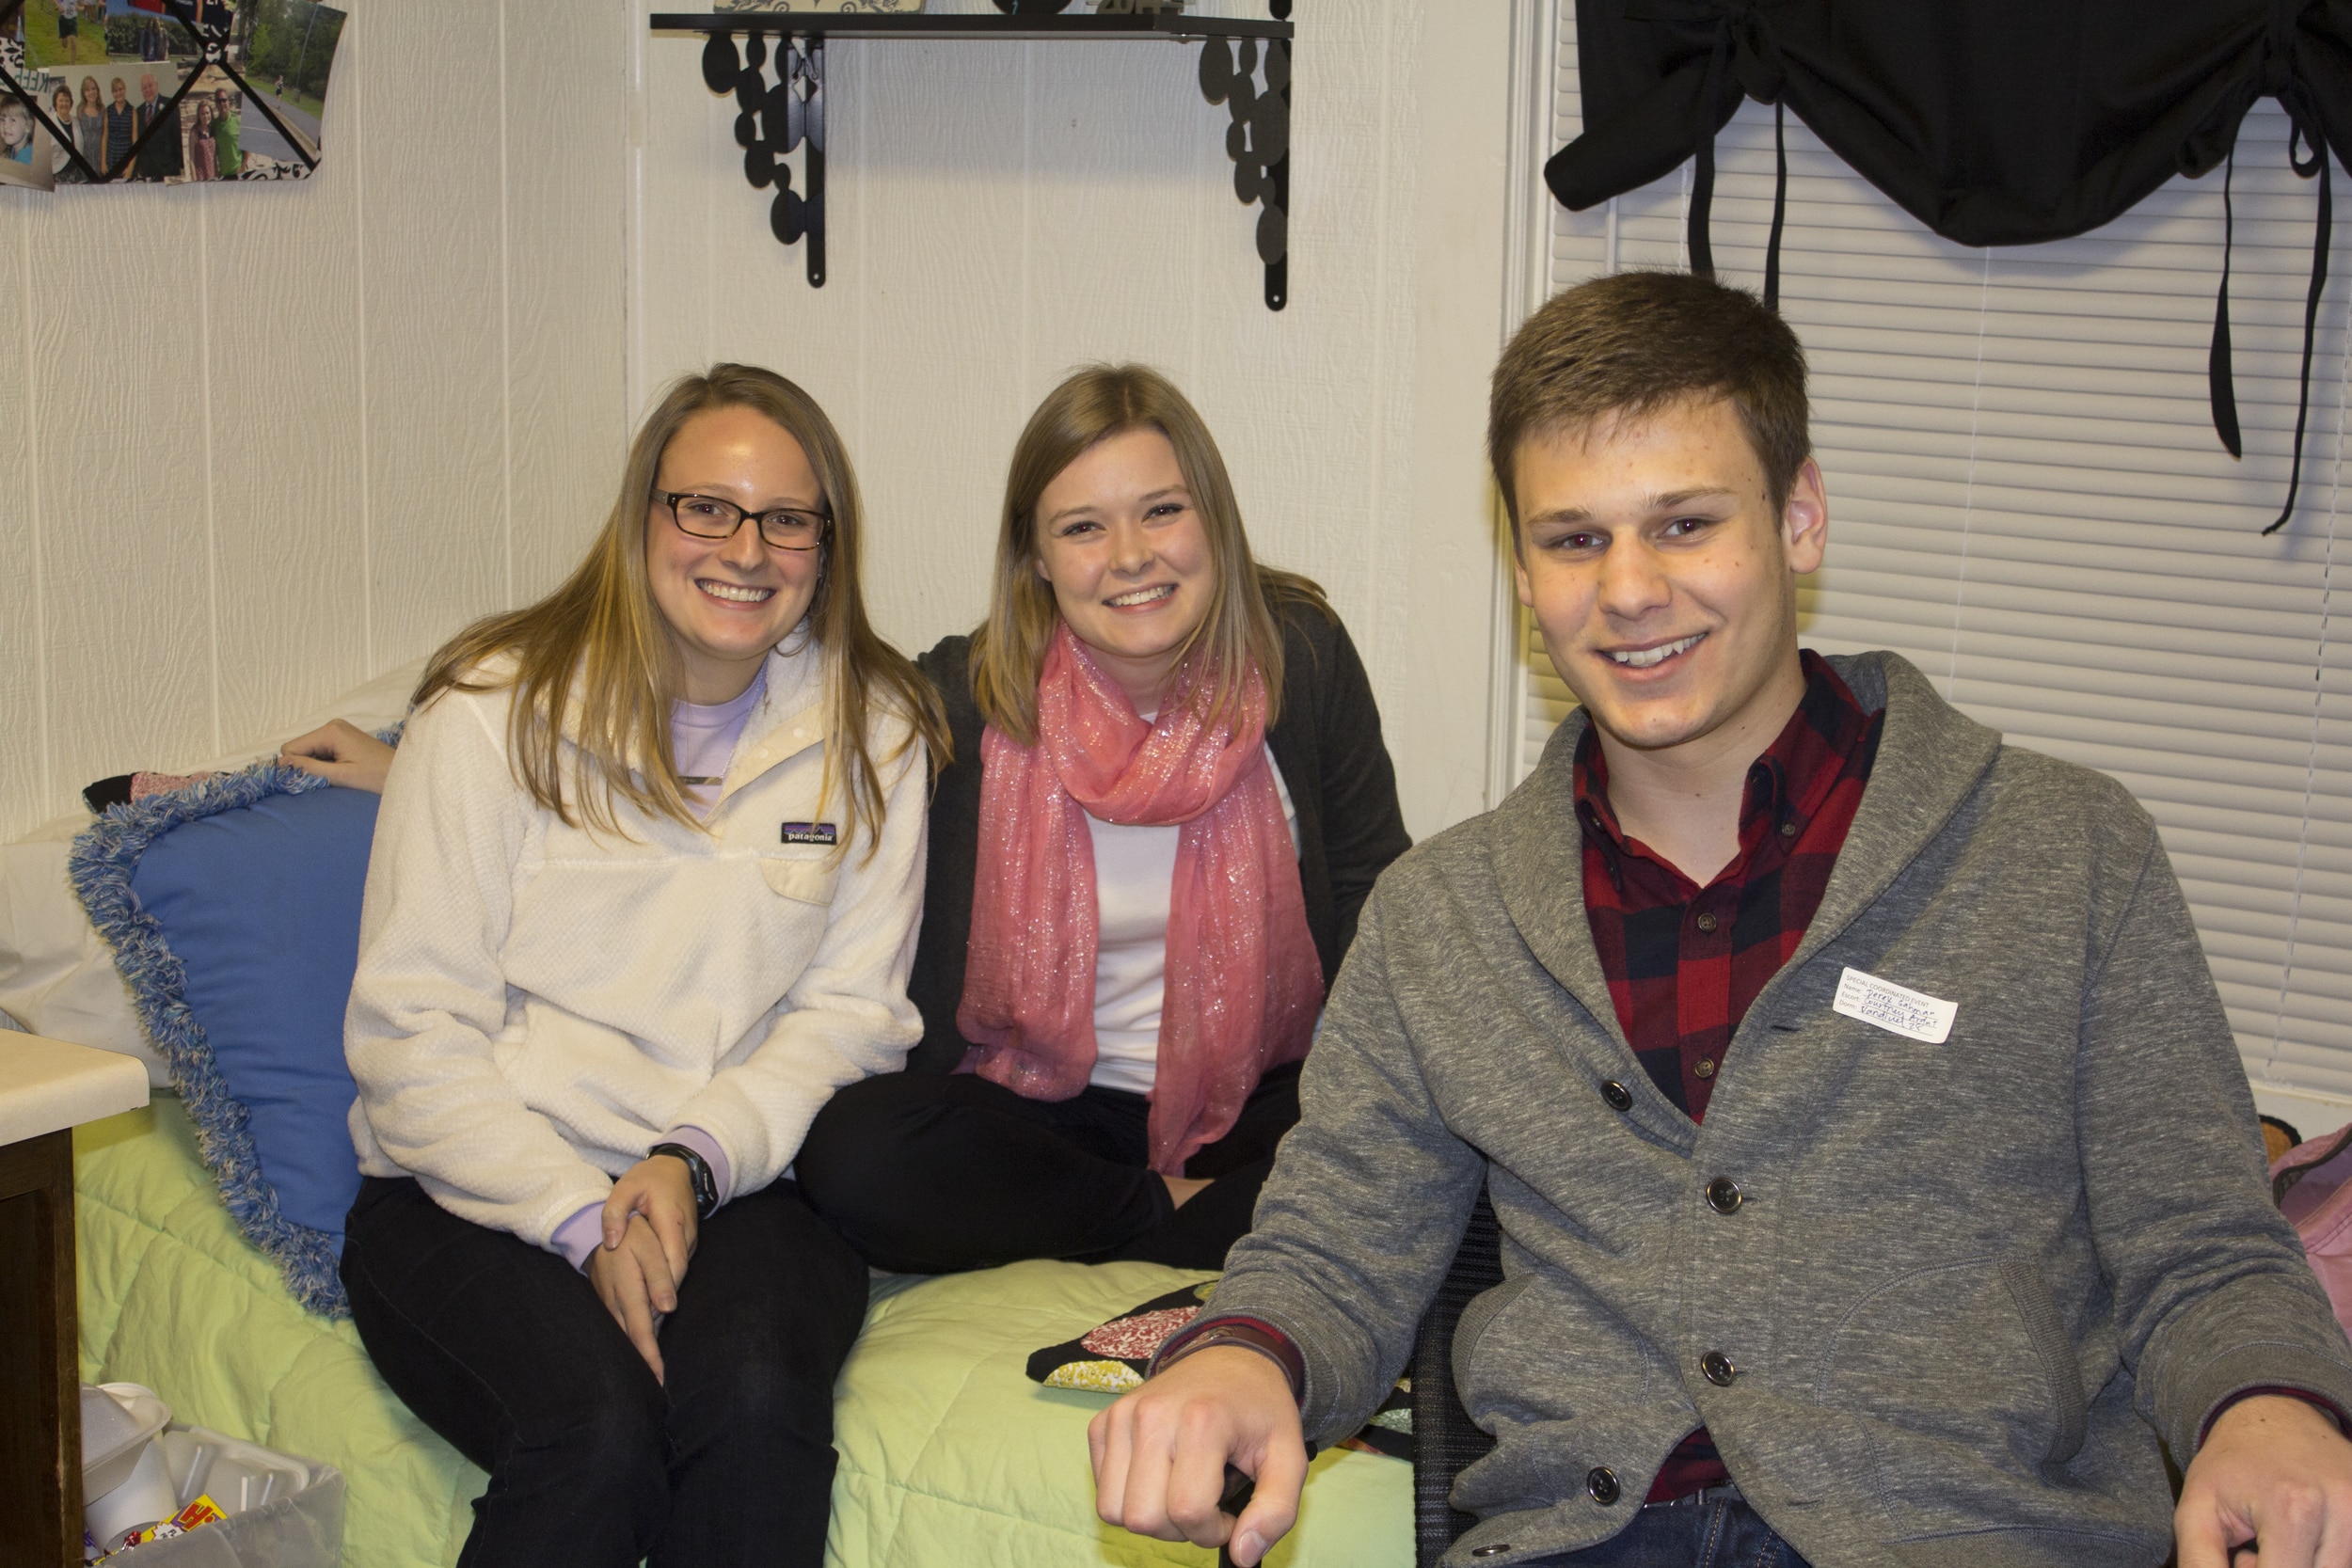  Derek Gahman, Courtney Arndt and Sally Earle drop the work and laughter for a quick picture during open dorms.&nbsp; 